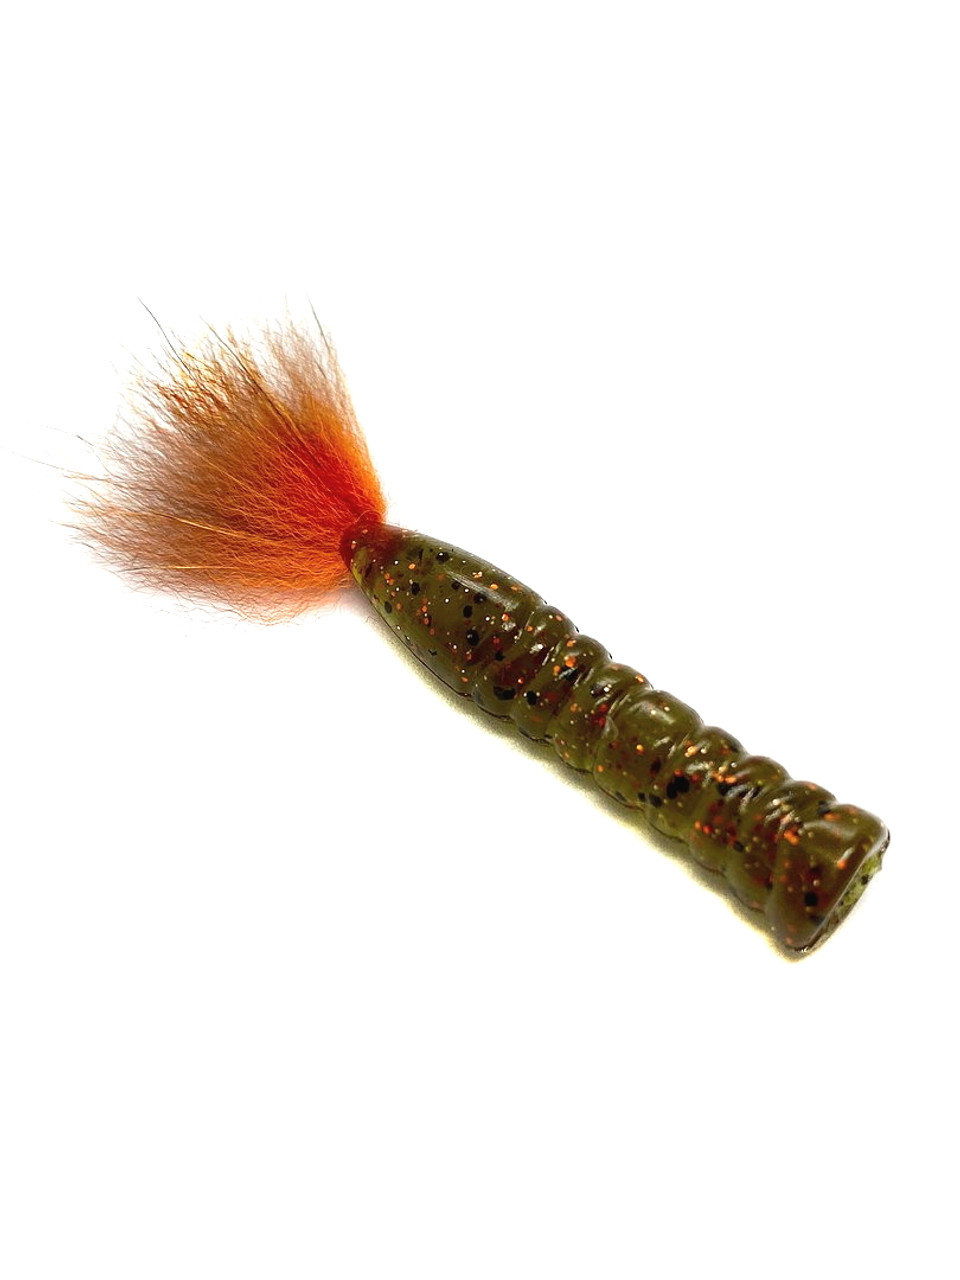 Rabid Baits Fox Tail Ned Rig Plastic Finesse Worm Lake Erie 3in 6pk 